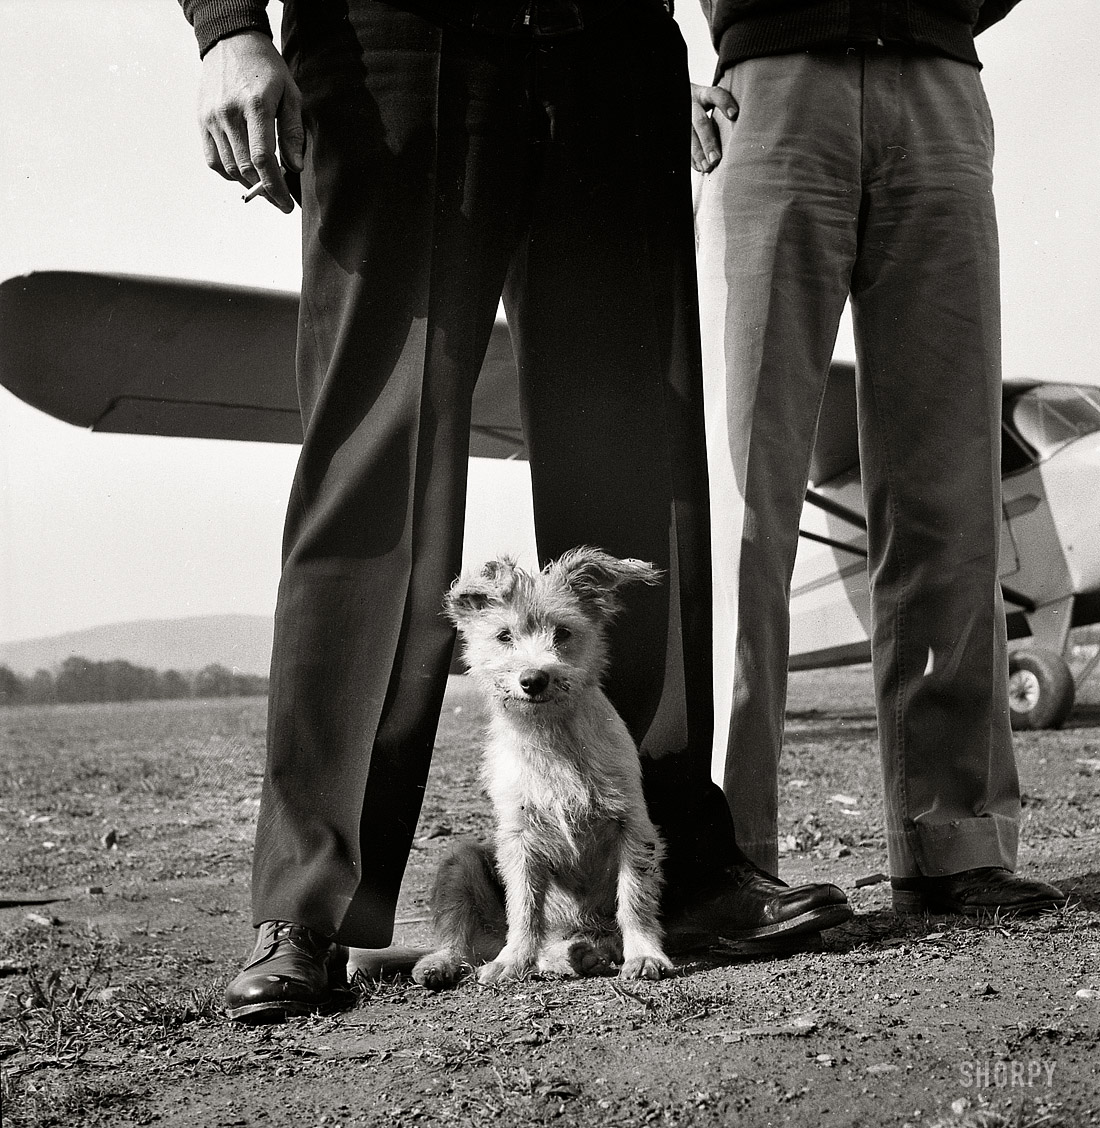 October 1943. Frederick, Maryland. "Greaseball, a mascot at the Stevens Airport." Photo by Esther Bubley, Office of War Information. View full size.